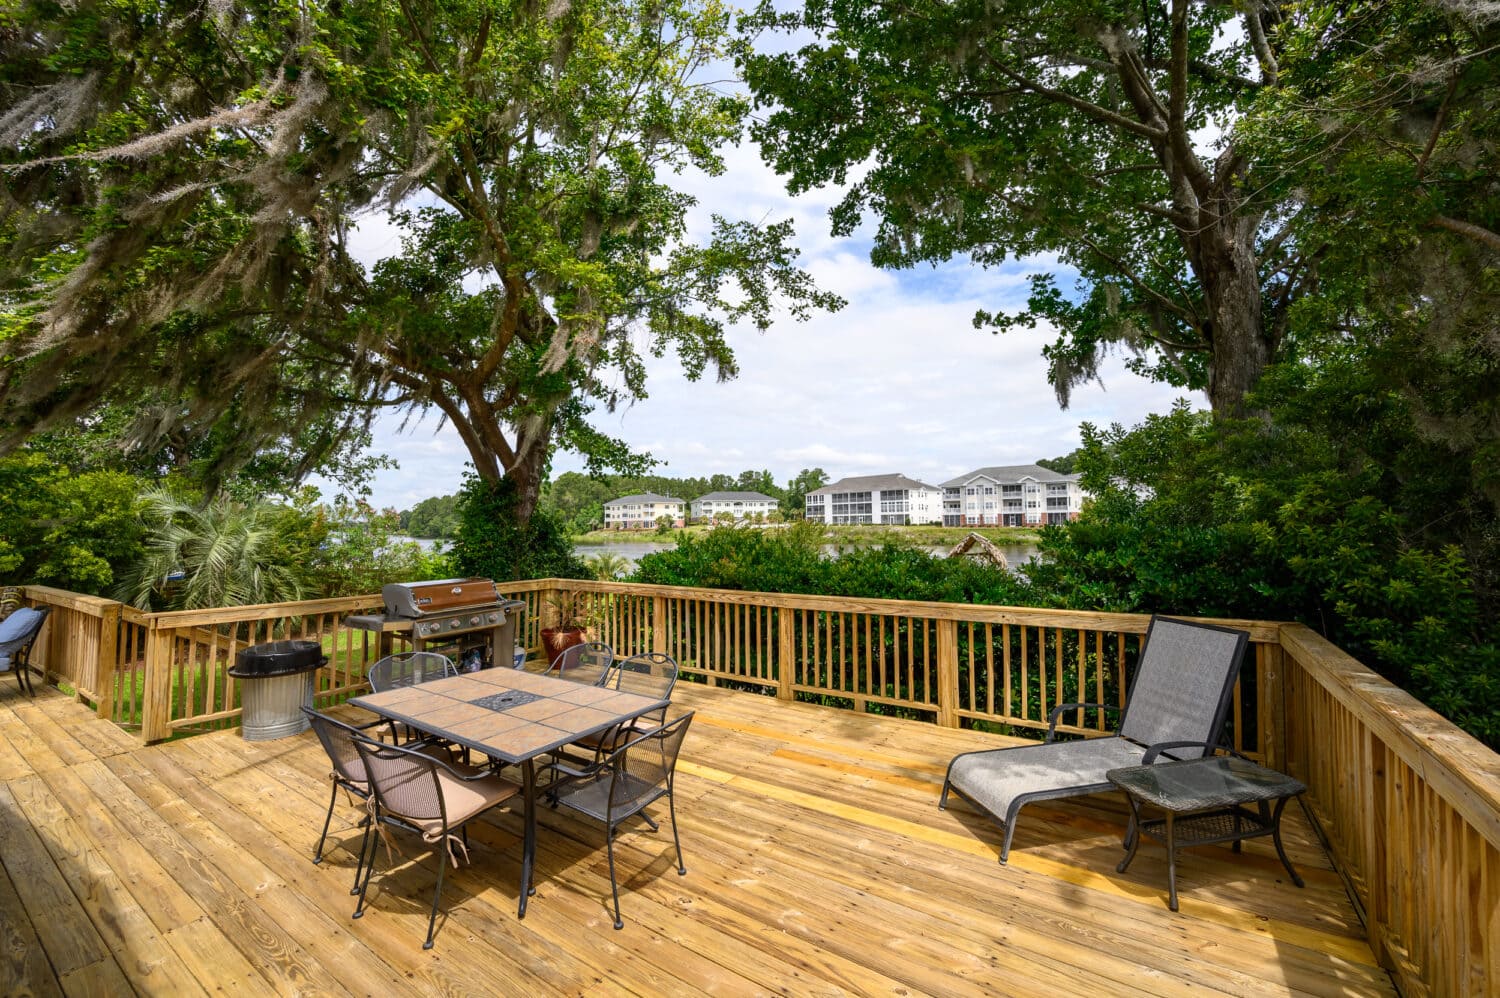 Home on the Intracoastal Waterway - Harbour Towne - Myrtle Beach